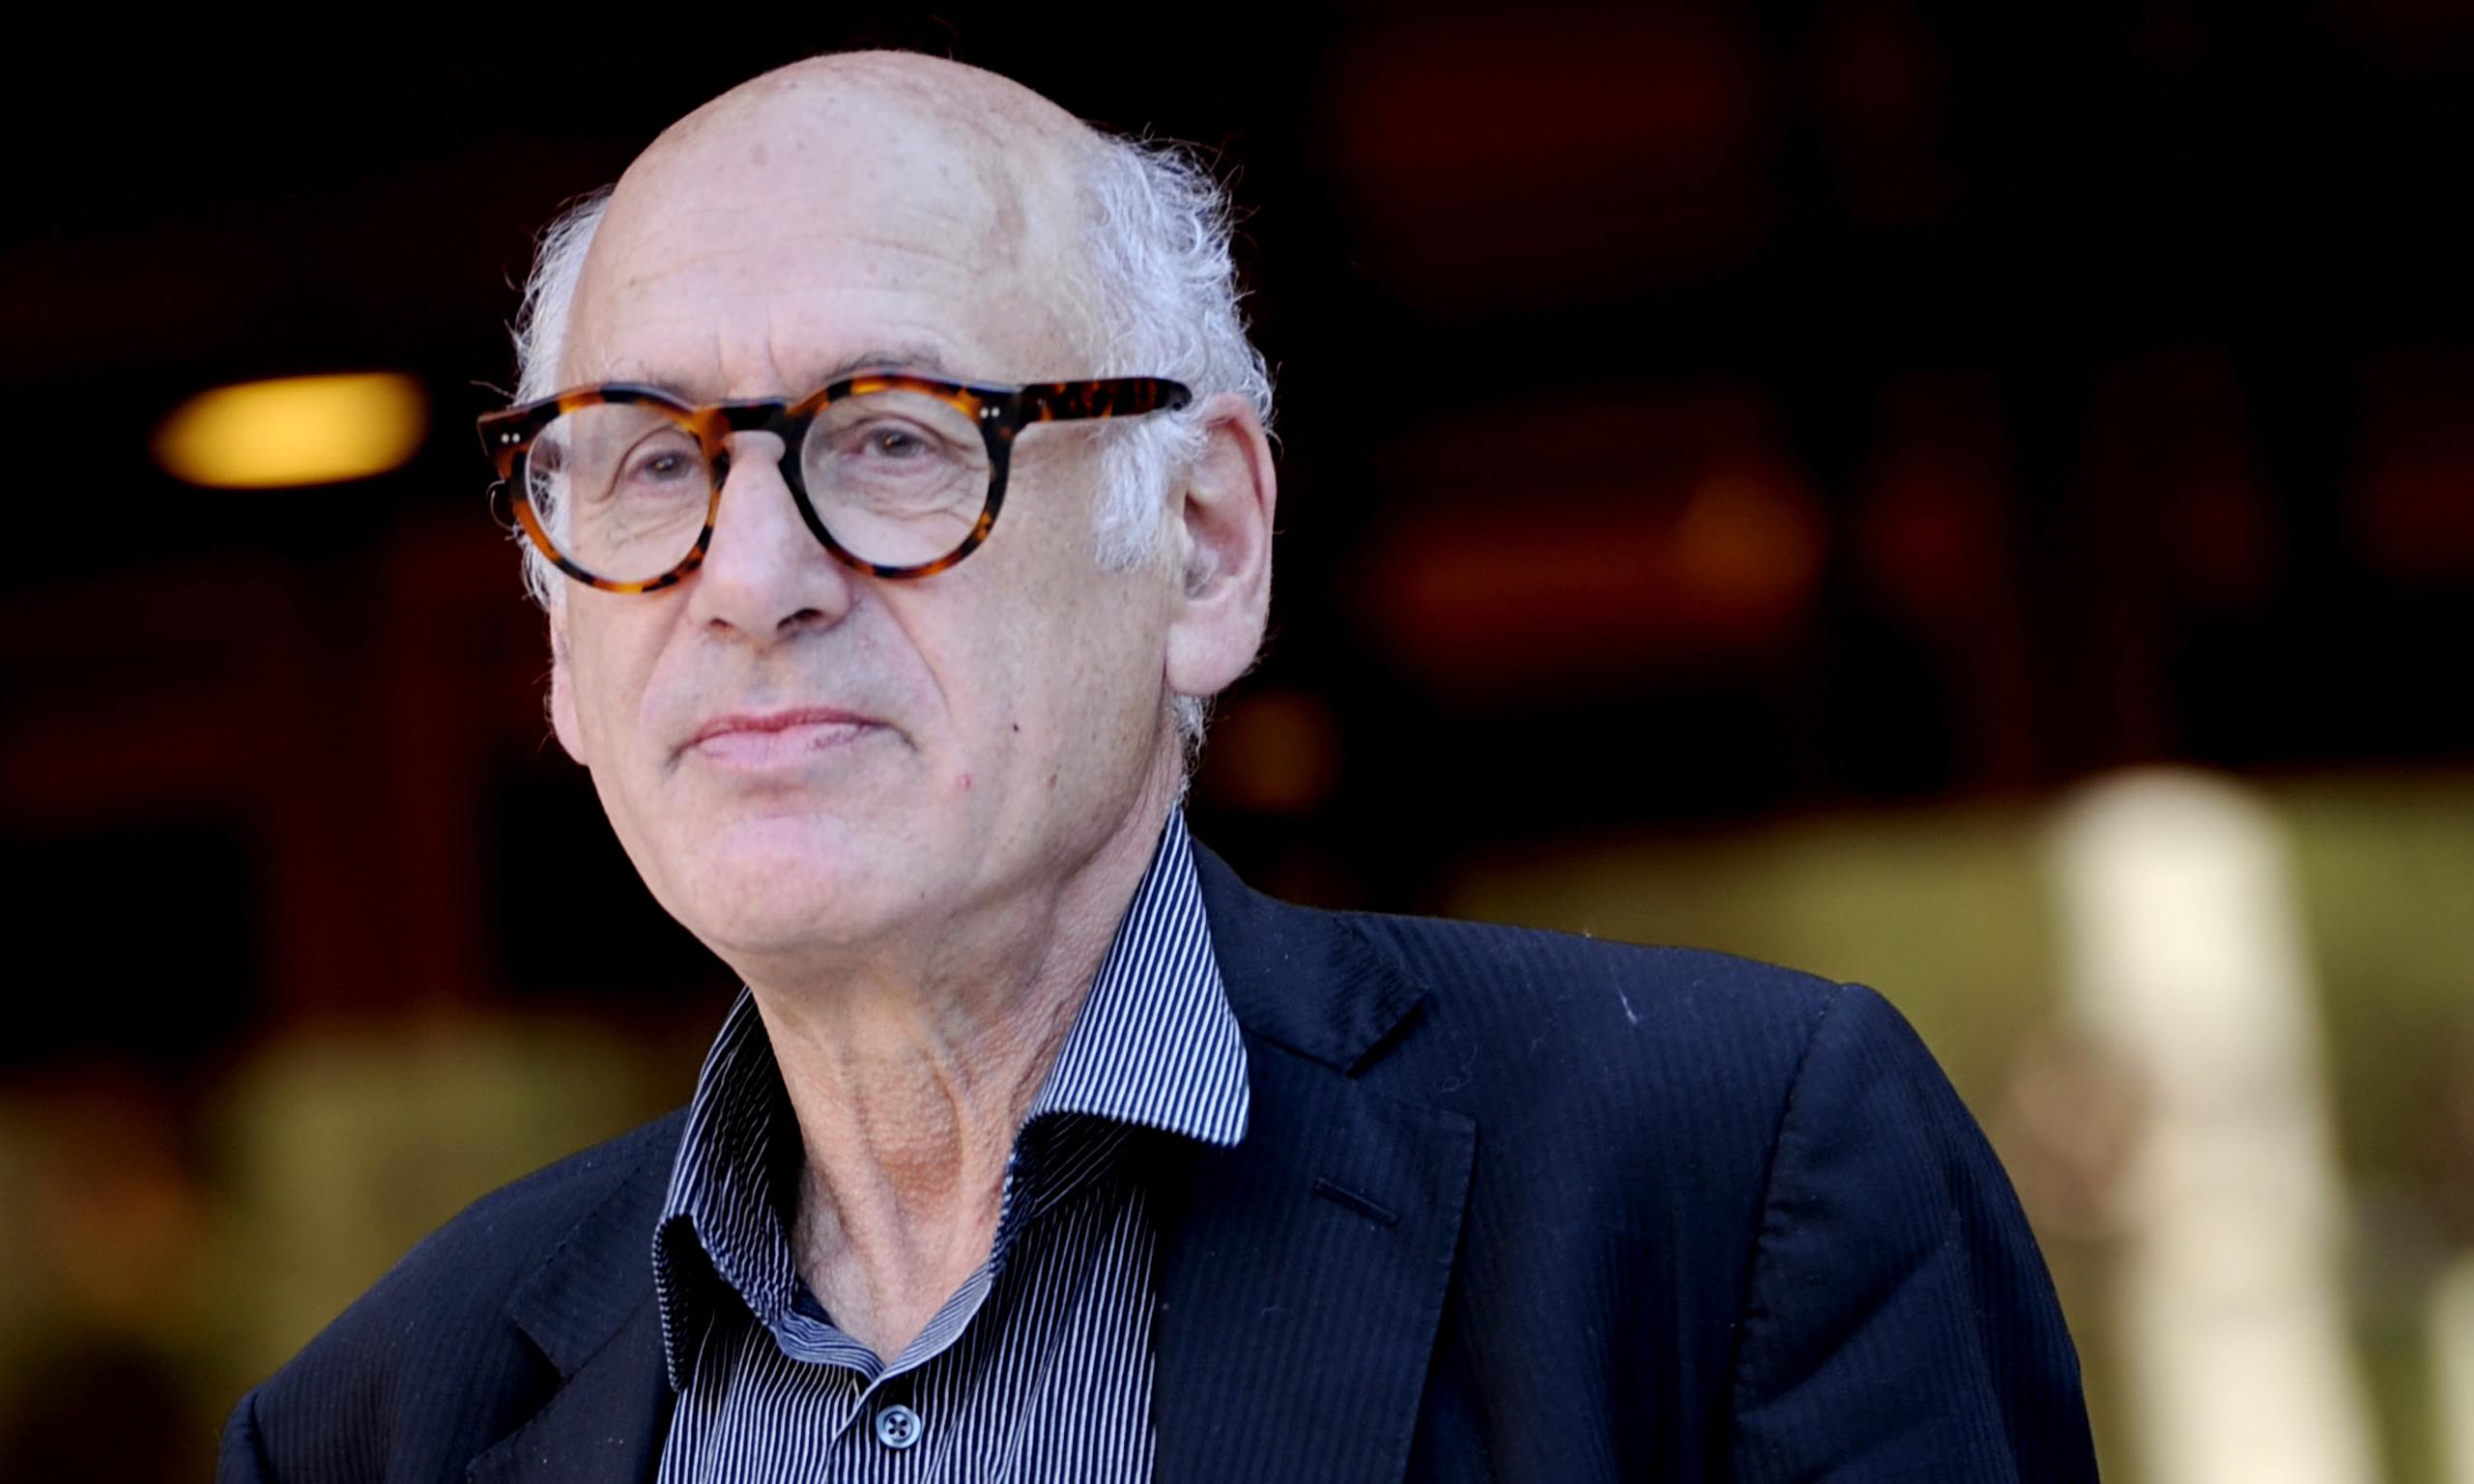 Michael Nyman's Hillsborough tragedy tribute piece reworked for